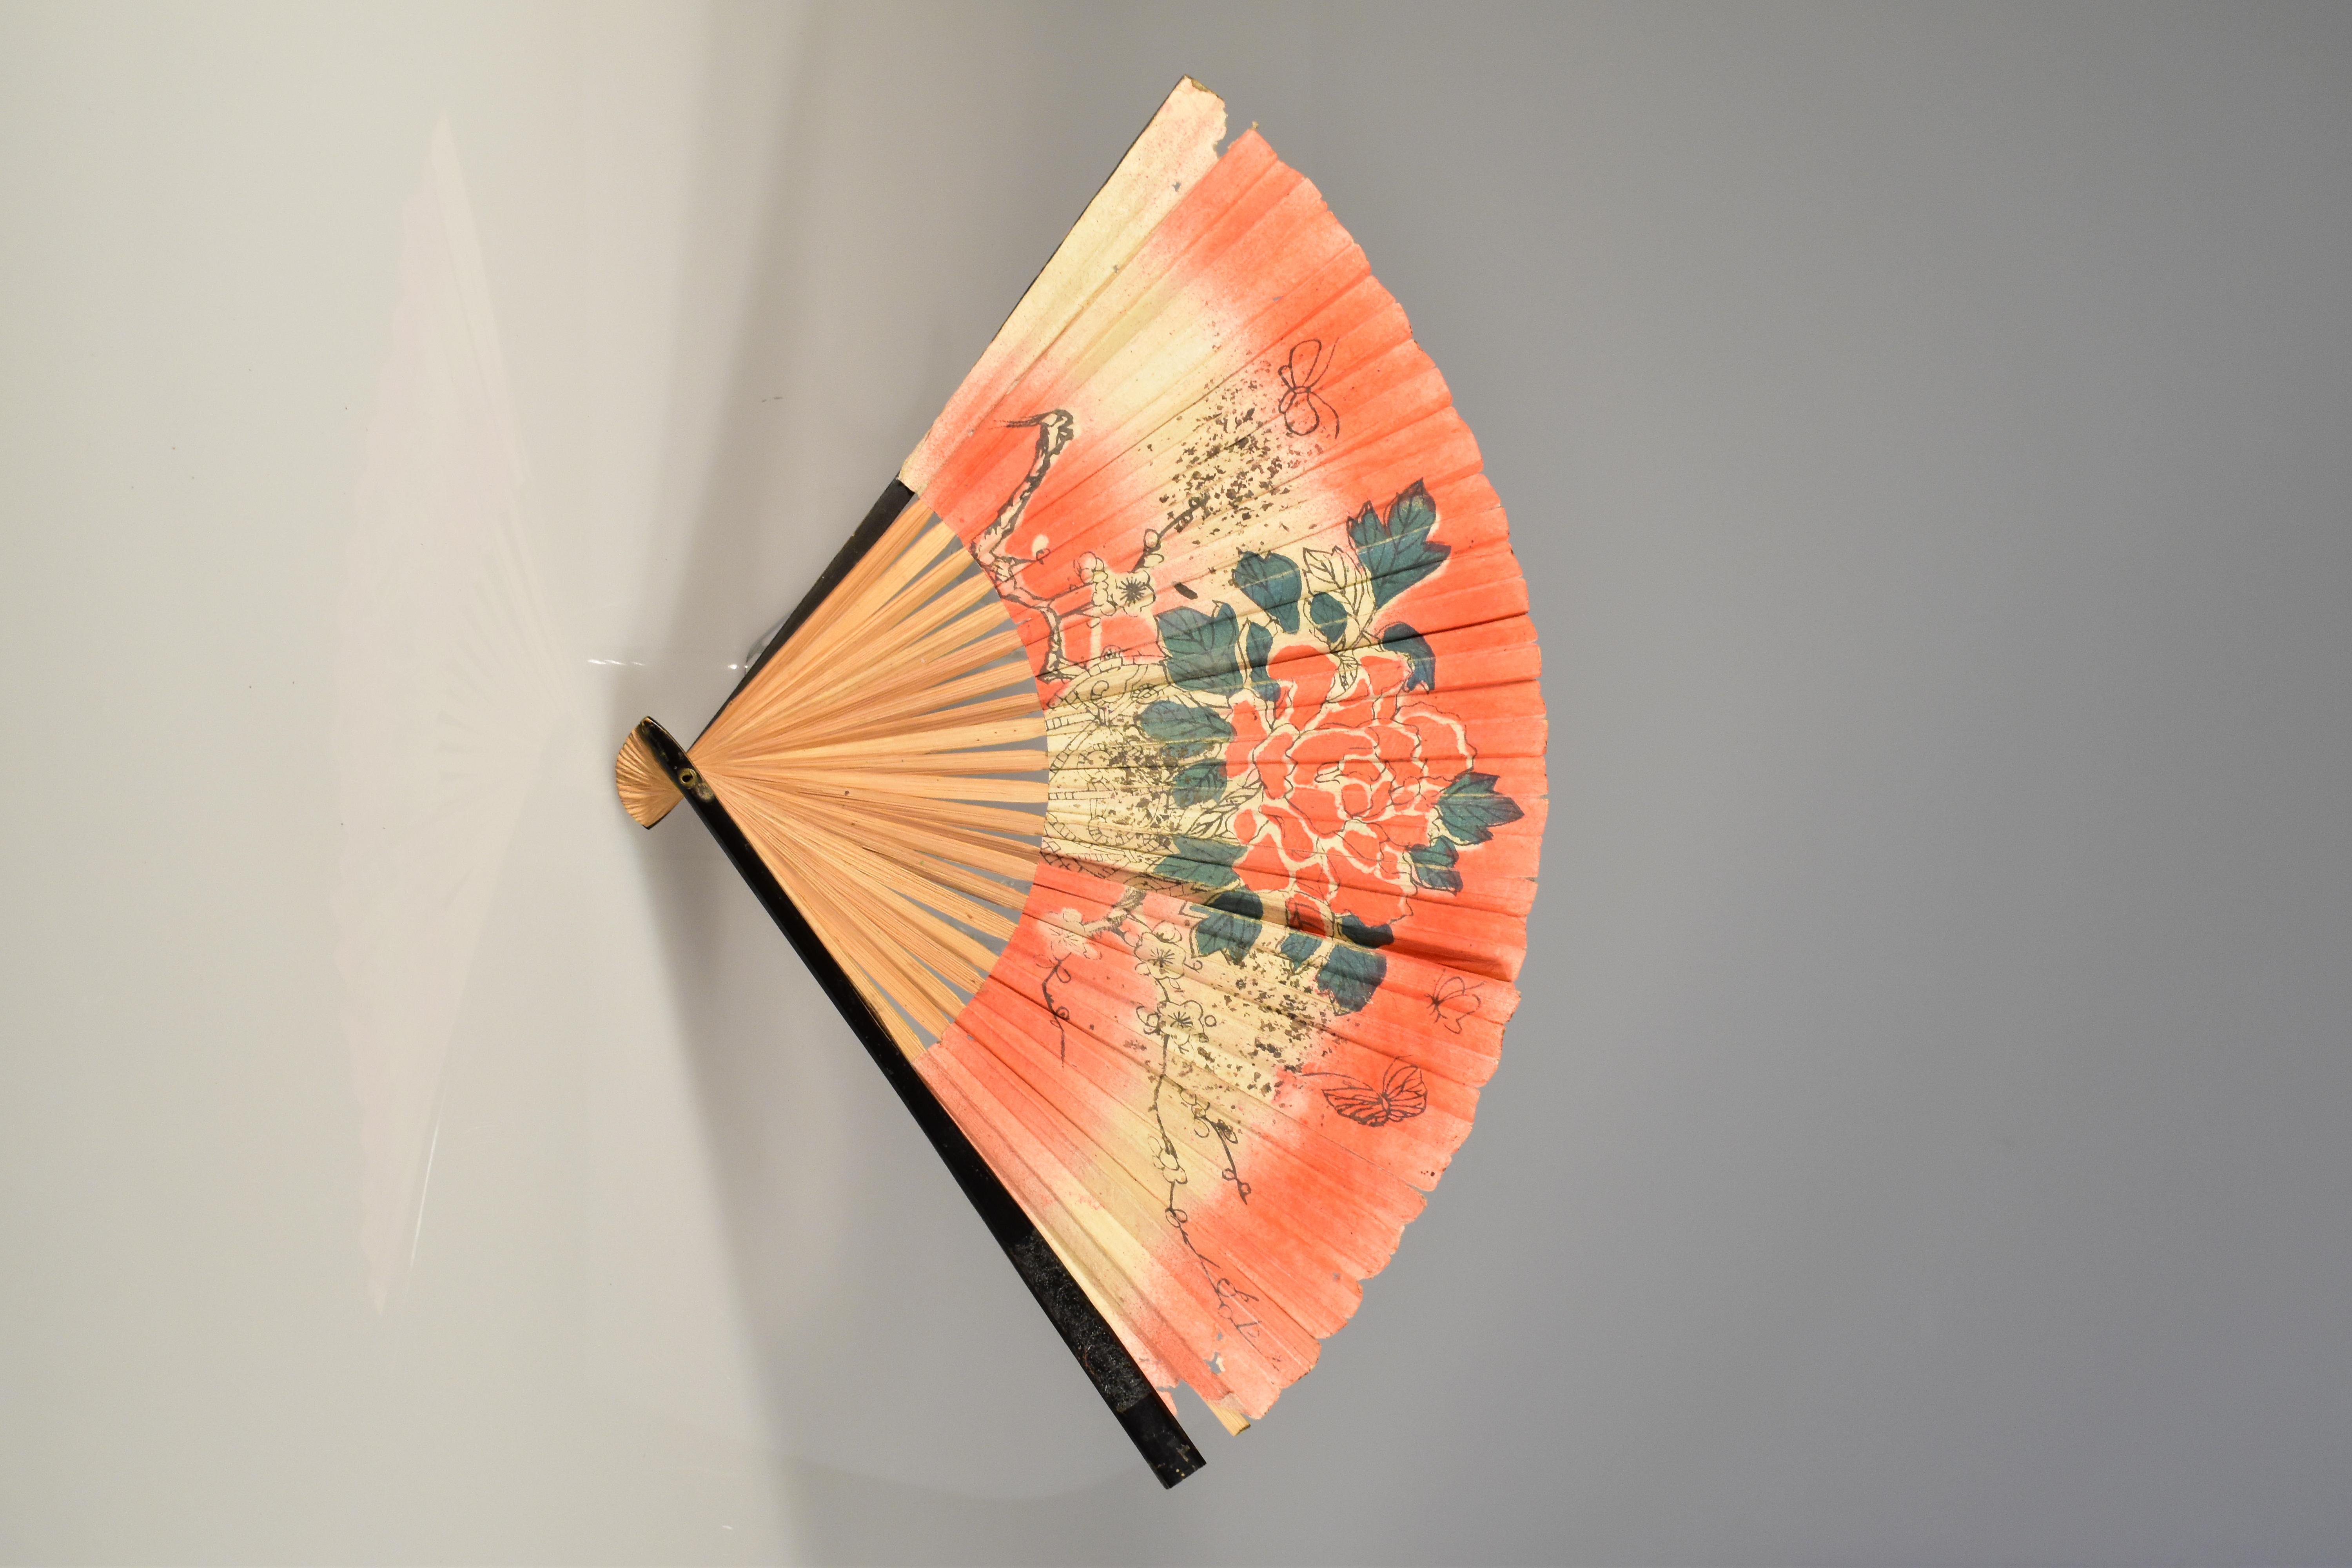 1979.01.9, Fan from the Amador Collection